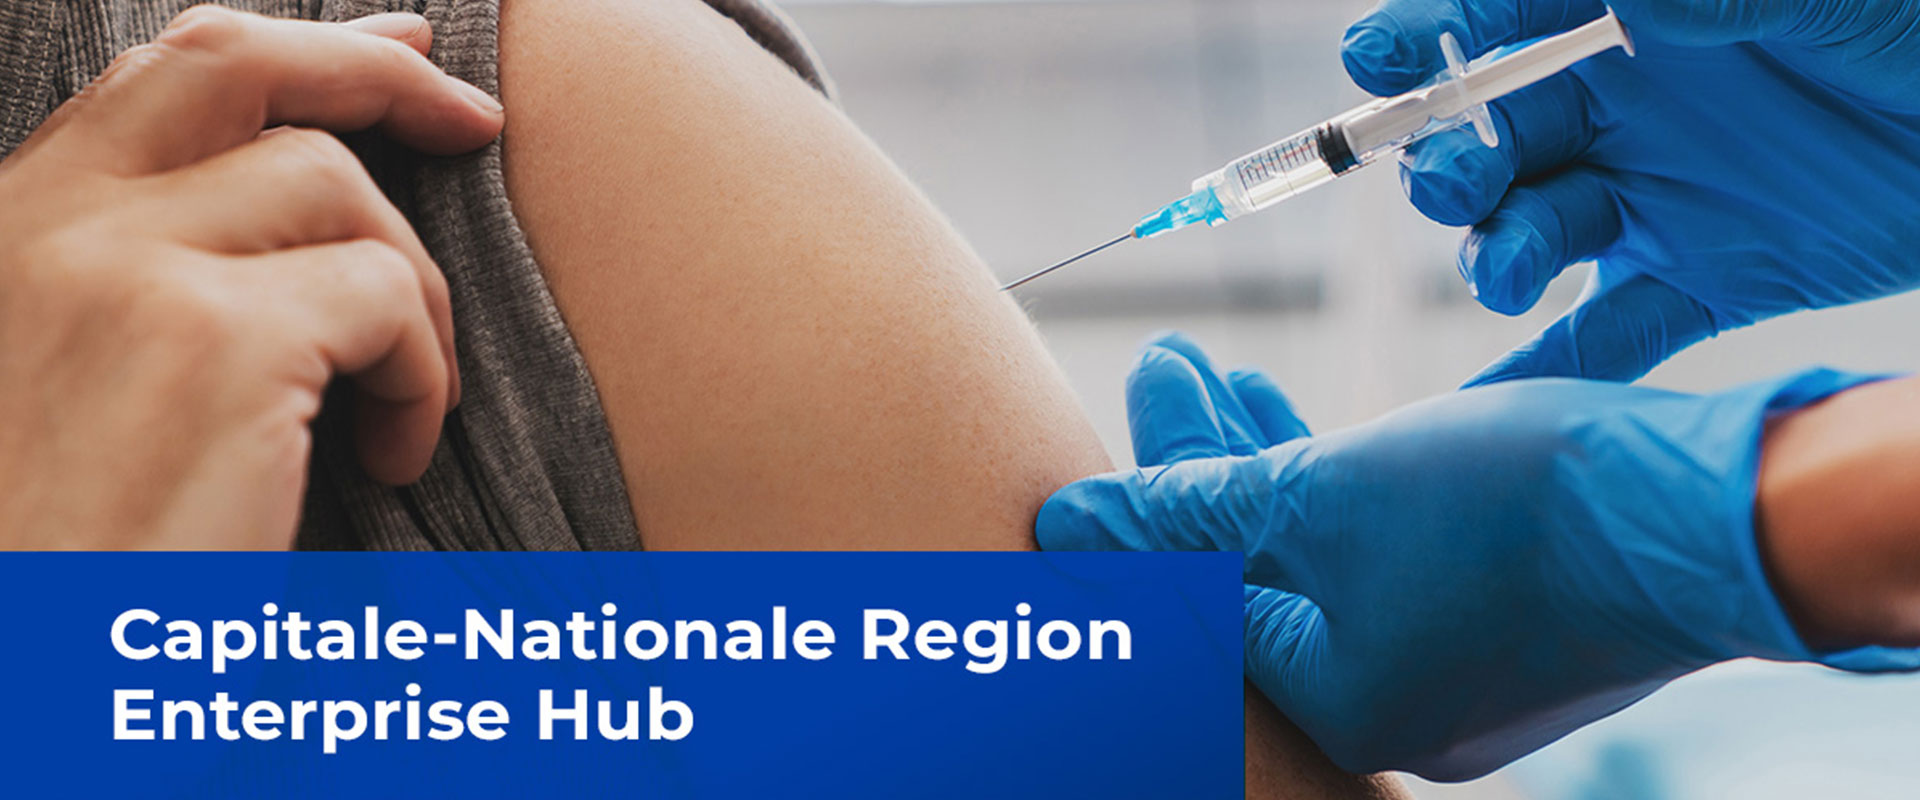 Companies join forces to set up a vaccination hub in the Capitale Nationale region